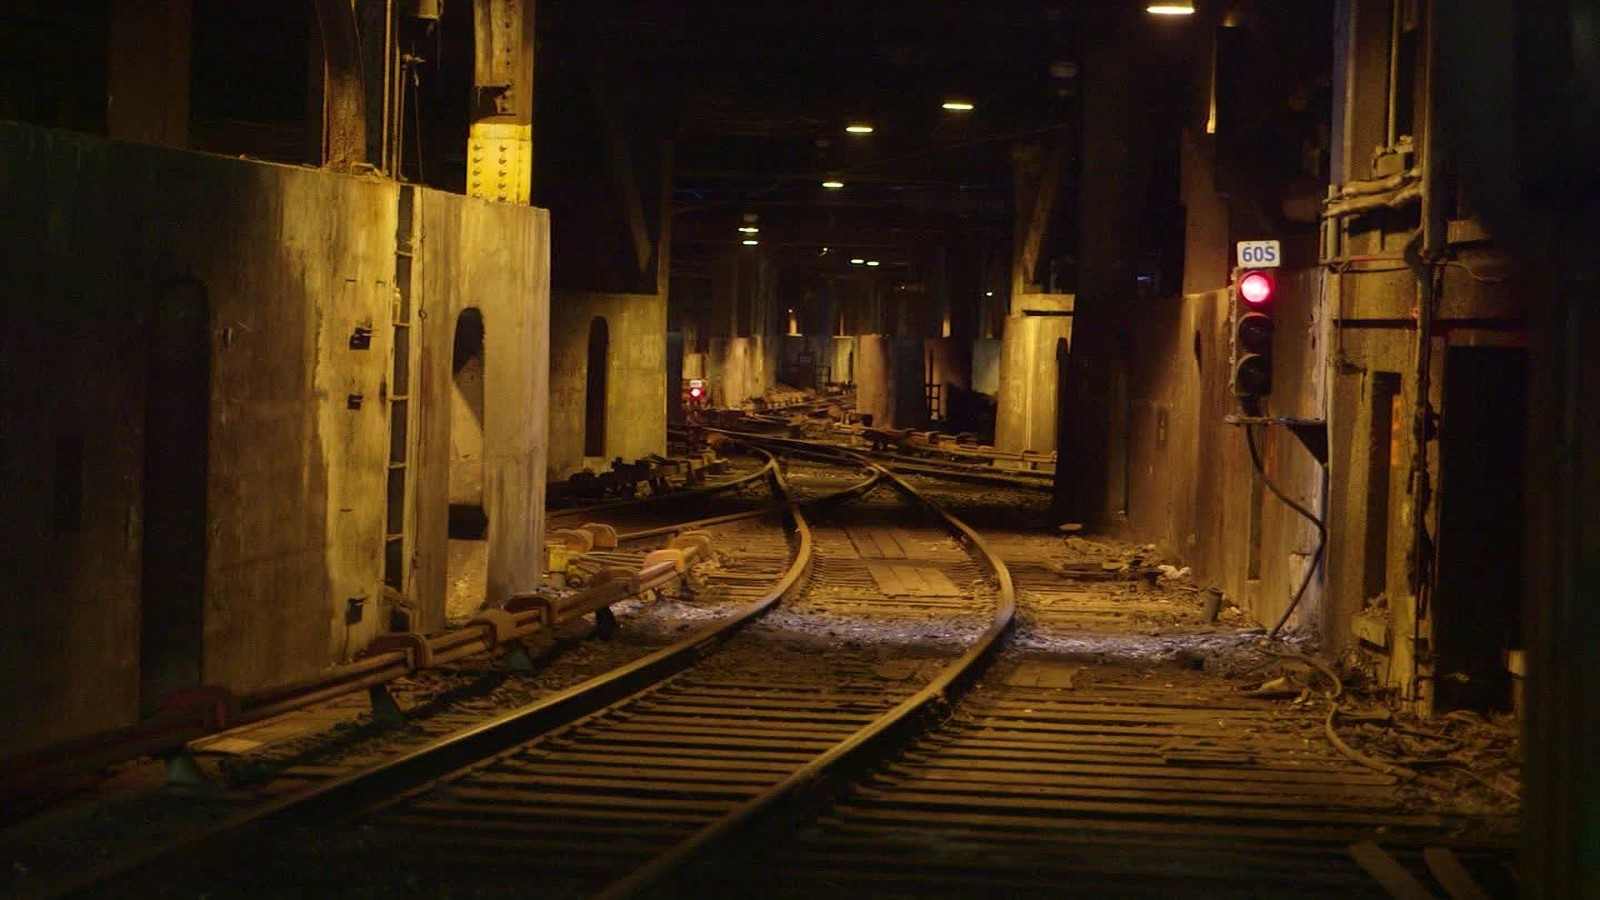 Track 61 Grand Central Terminal - Track 61 - a forgotten train platform in New York